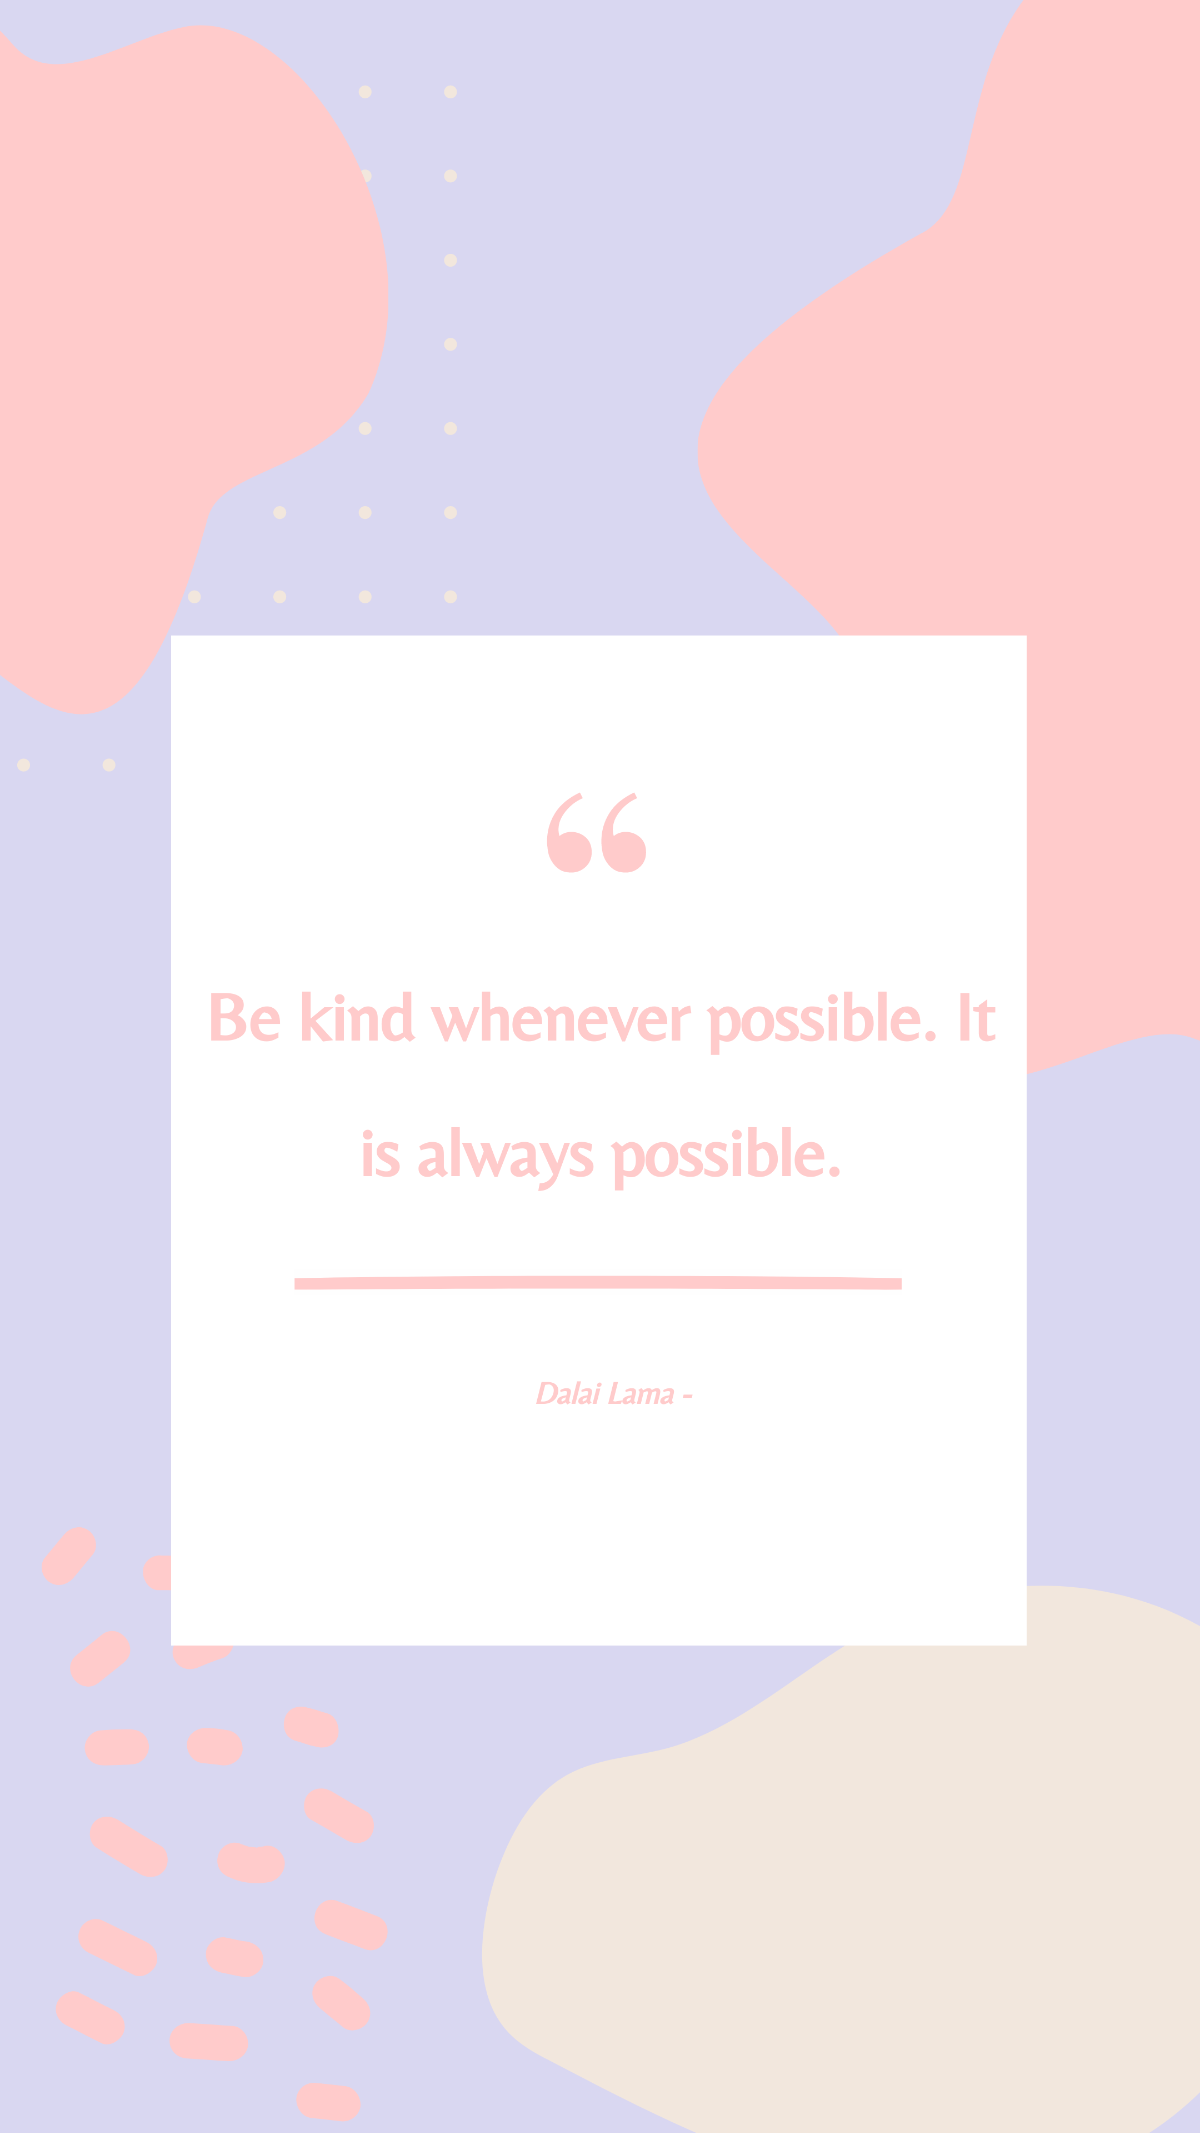 Dalai Lama - Be kind whenever possible. It is always possible. Template